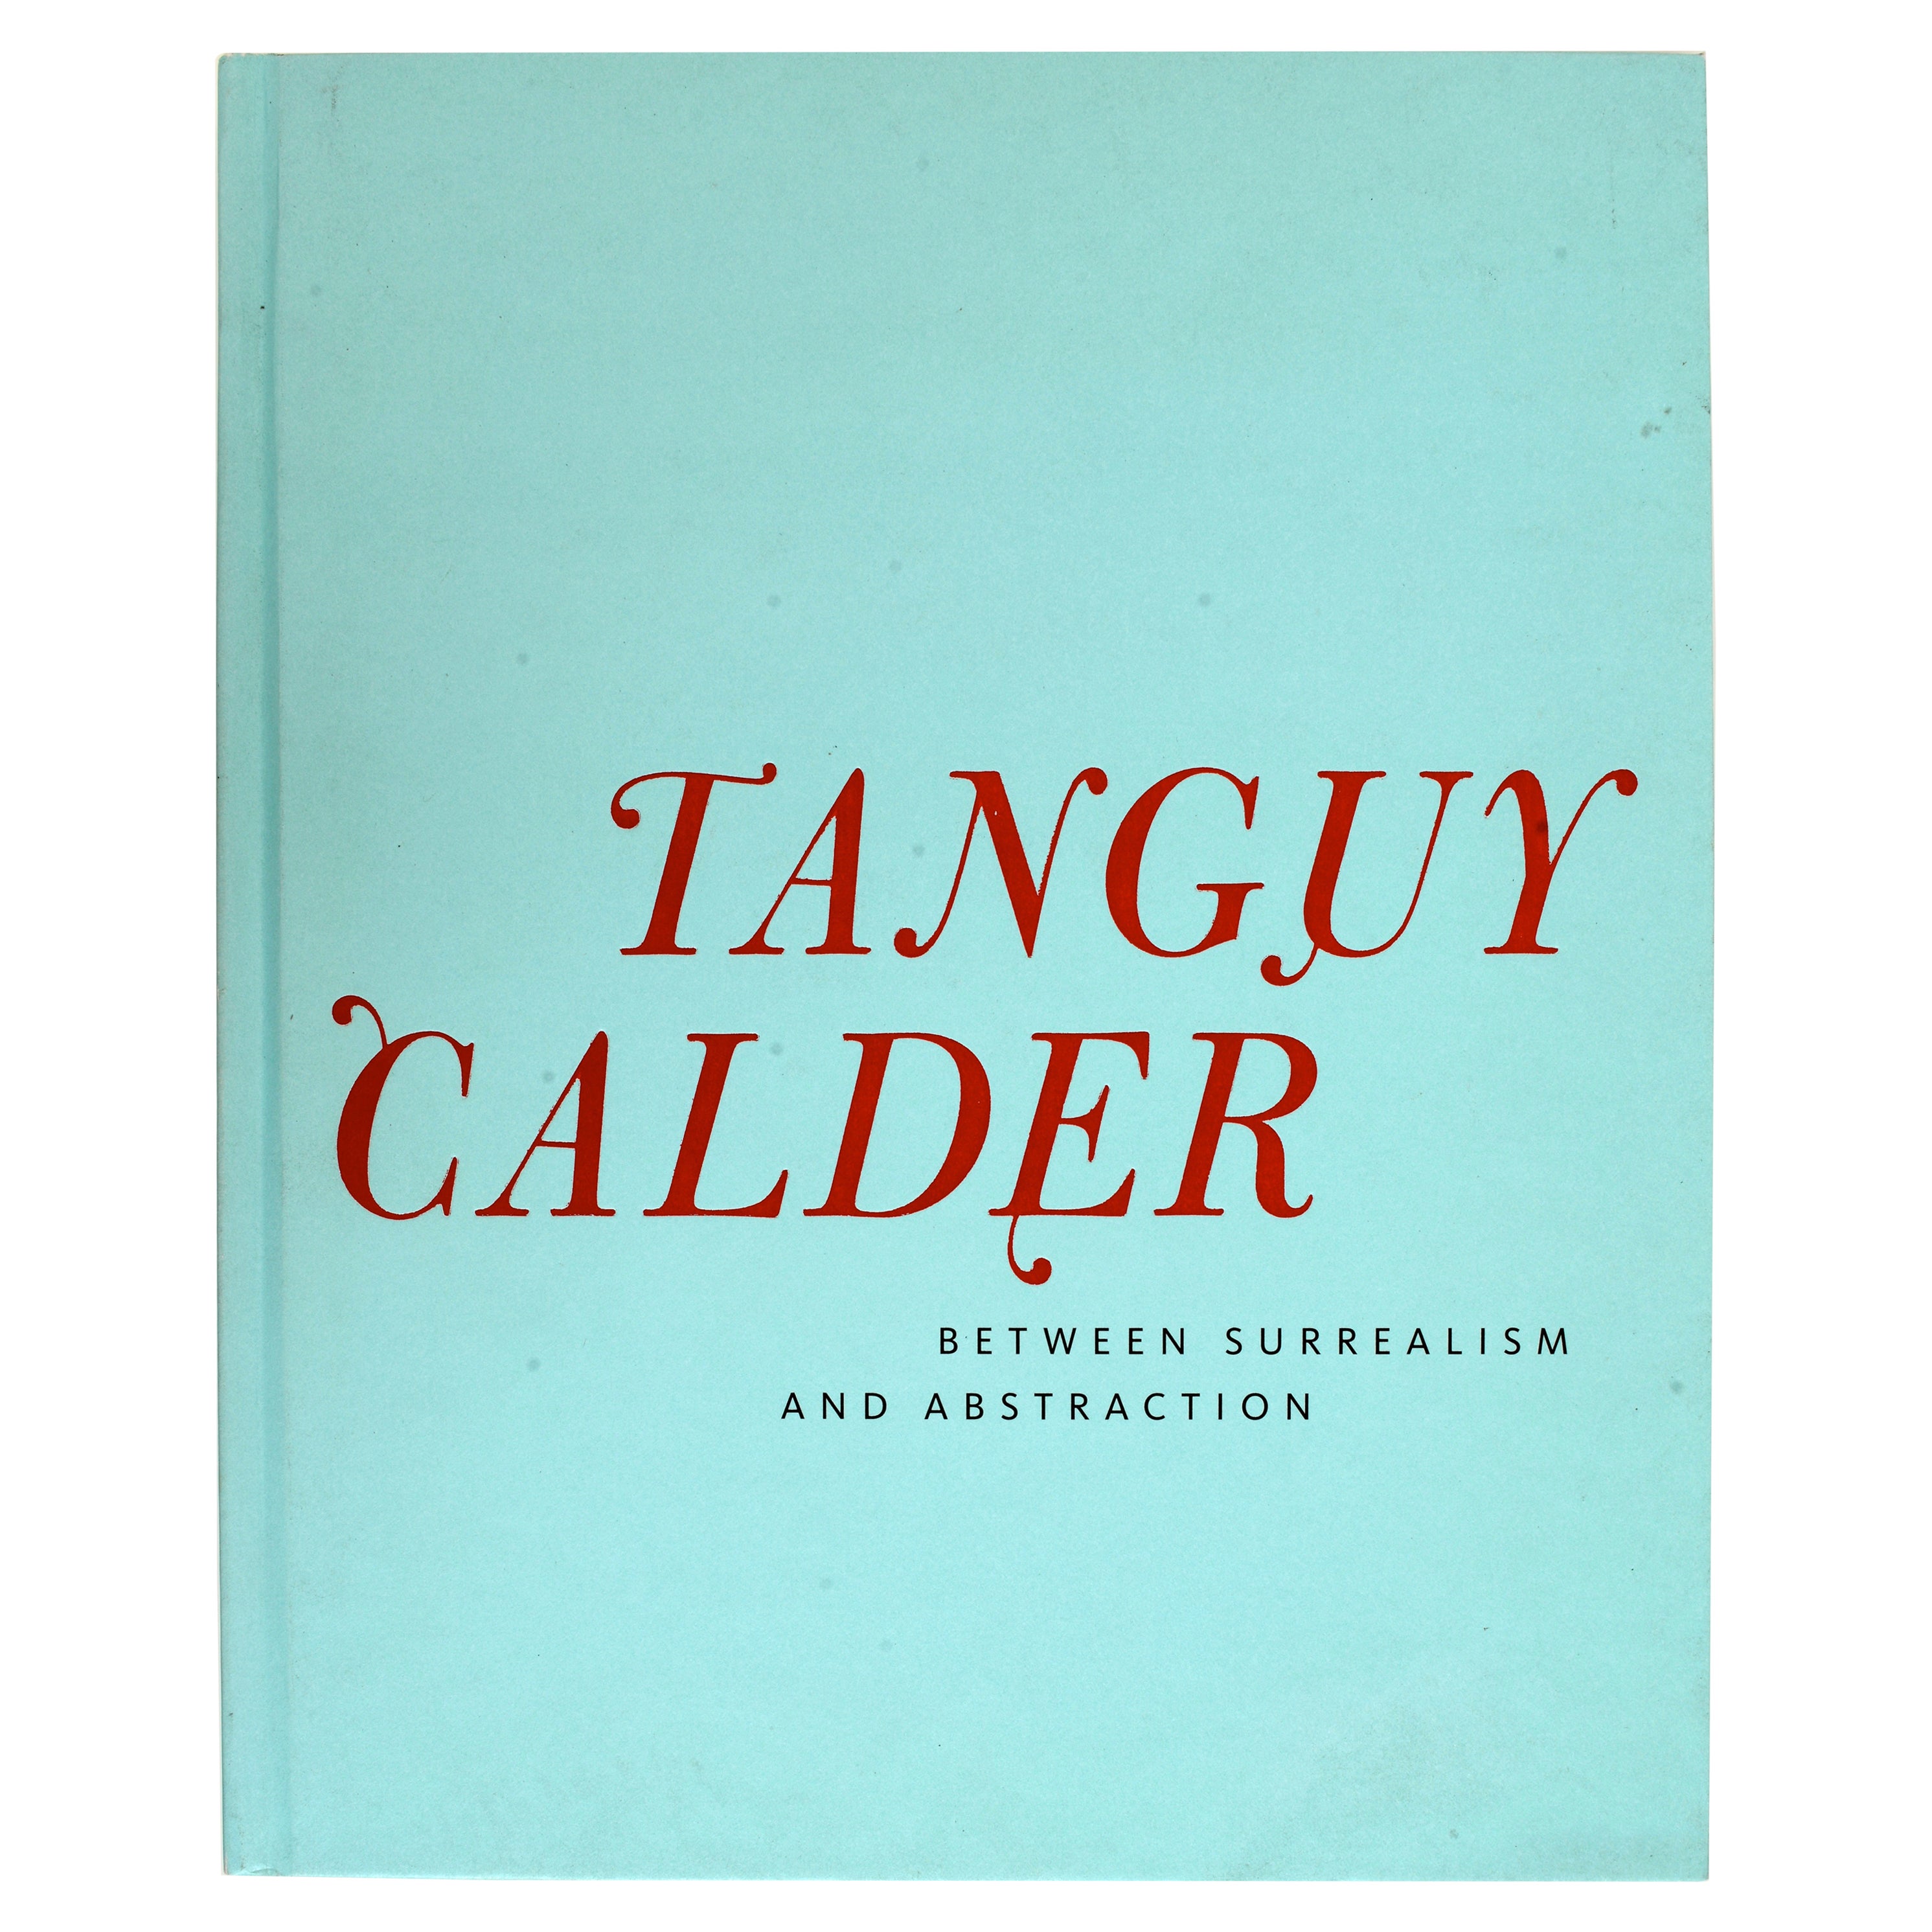 Yves Tanguy & Alexander Calder Between Surrealism and Abstraction, 1st Ed